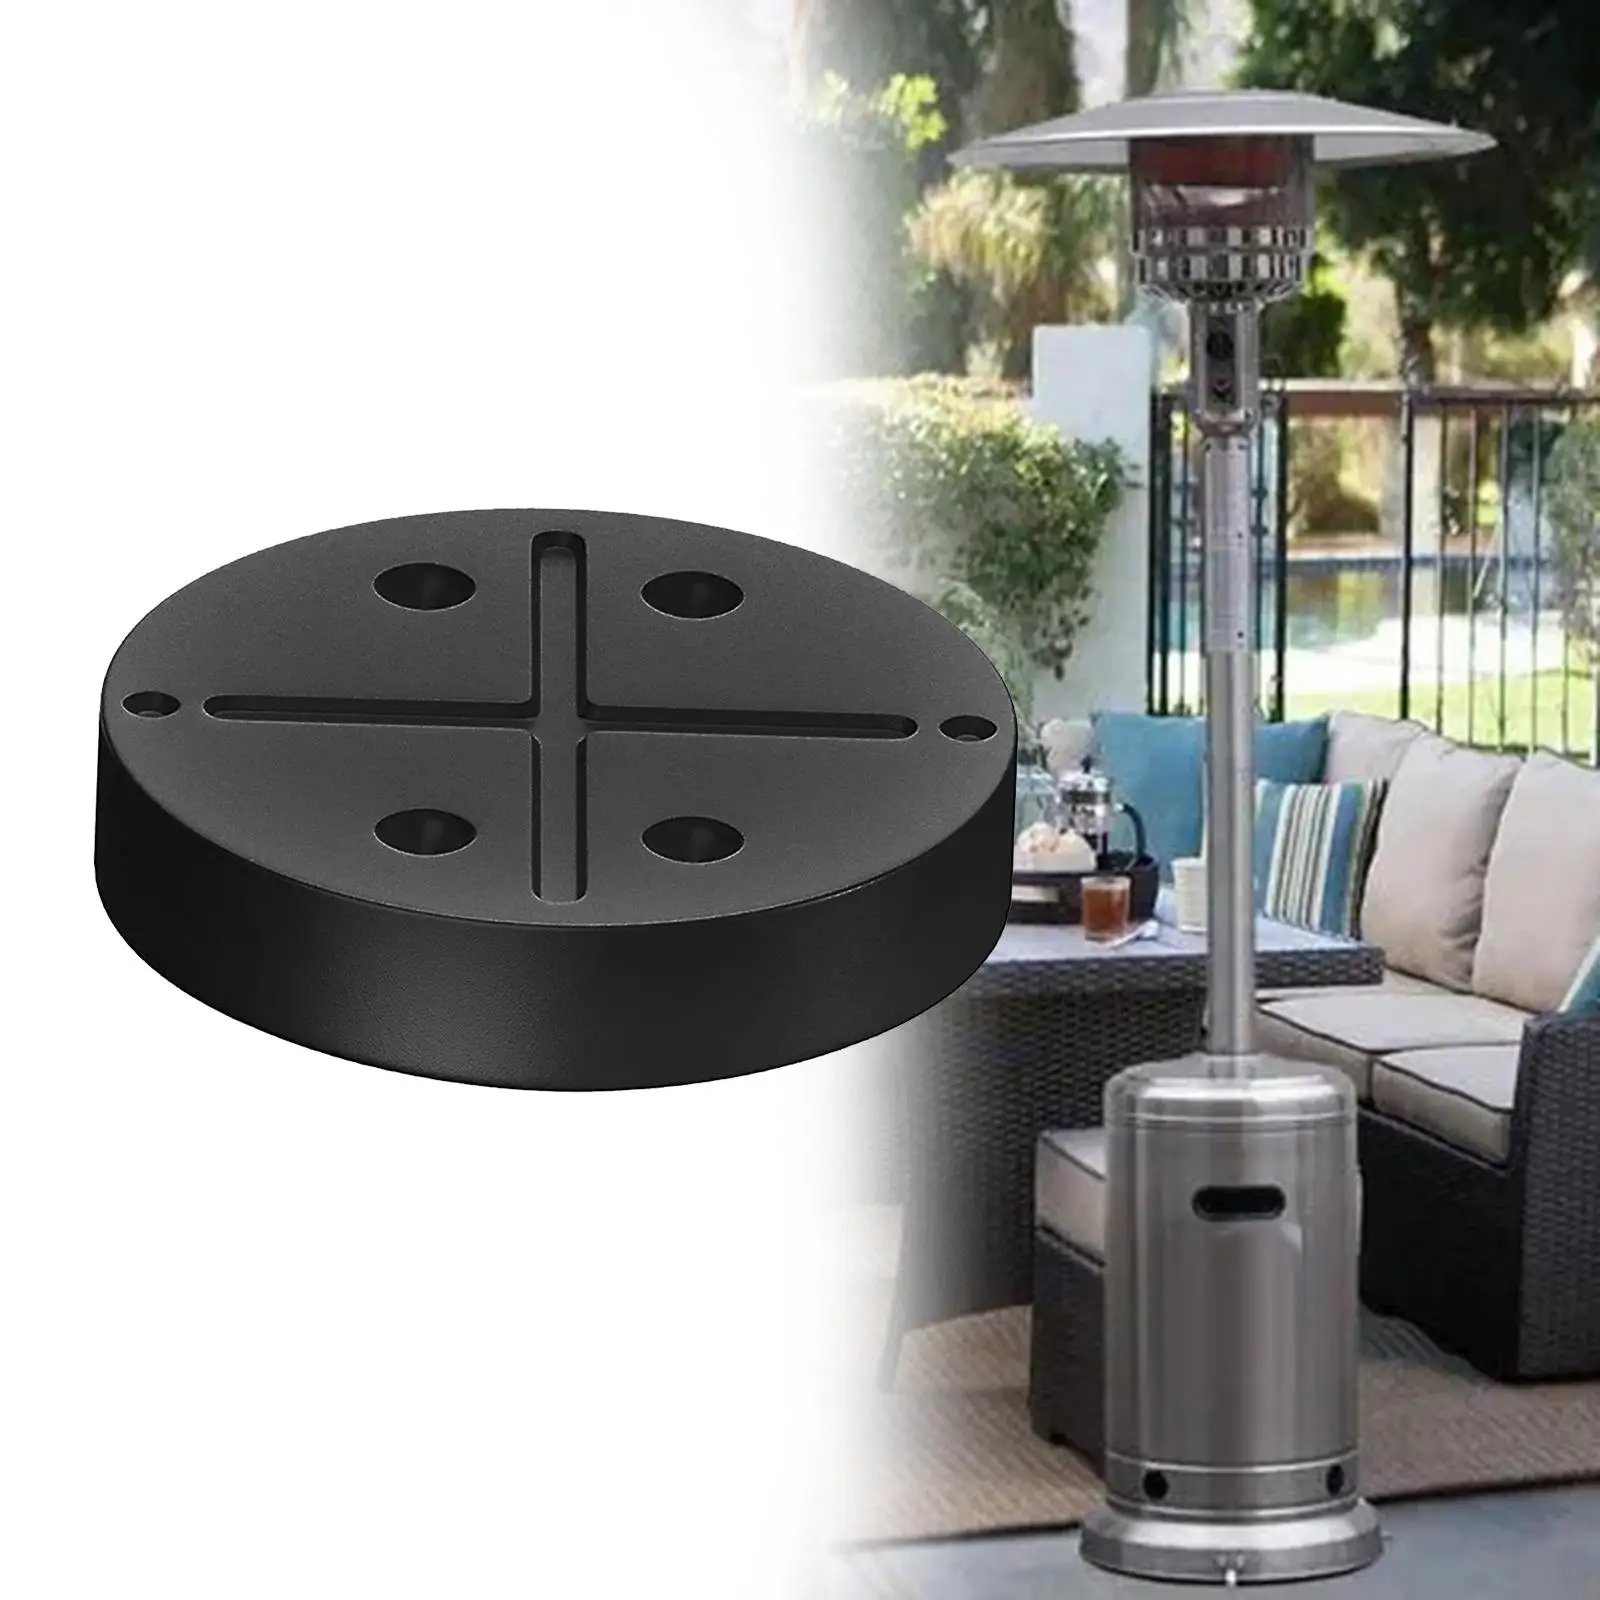 Patio Heater Sand Box/Water Box Premium Durable High Performance Replacement